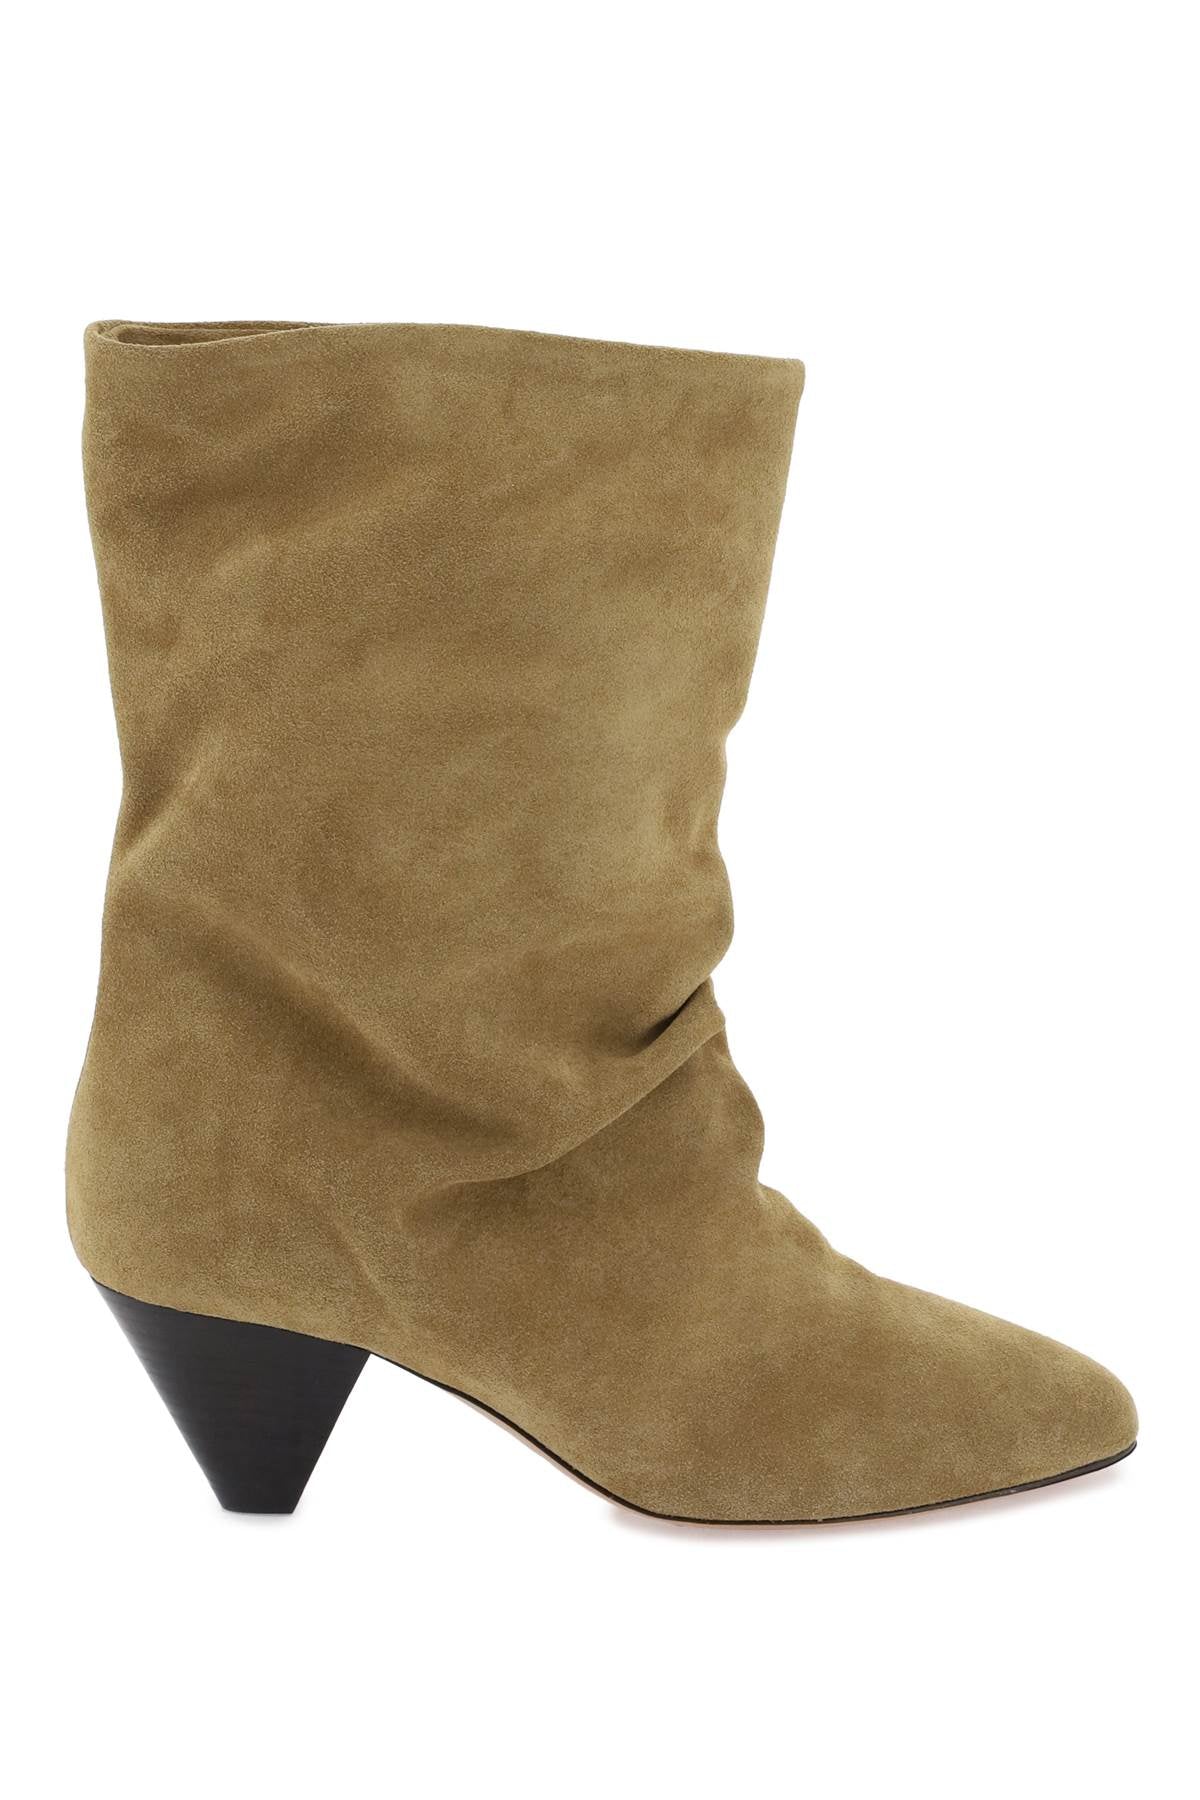 Isabel marant suede reachi ankle boots-0